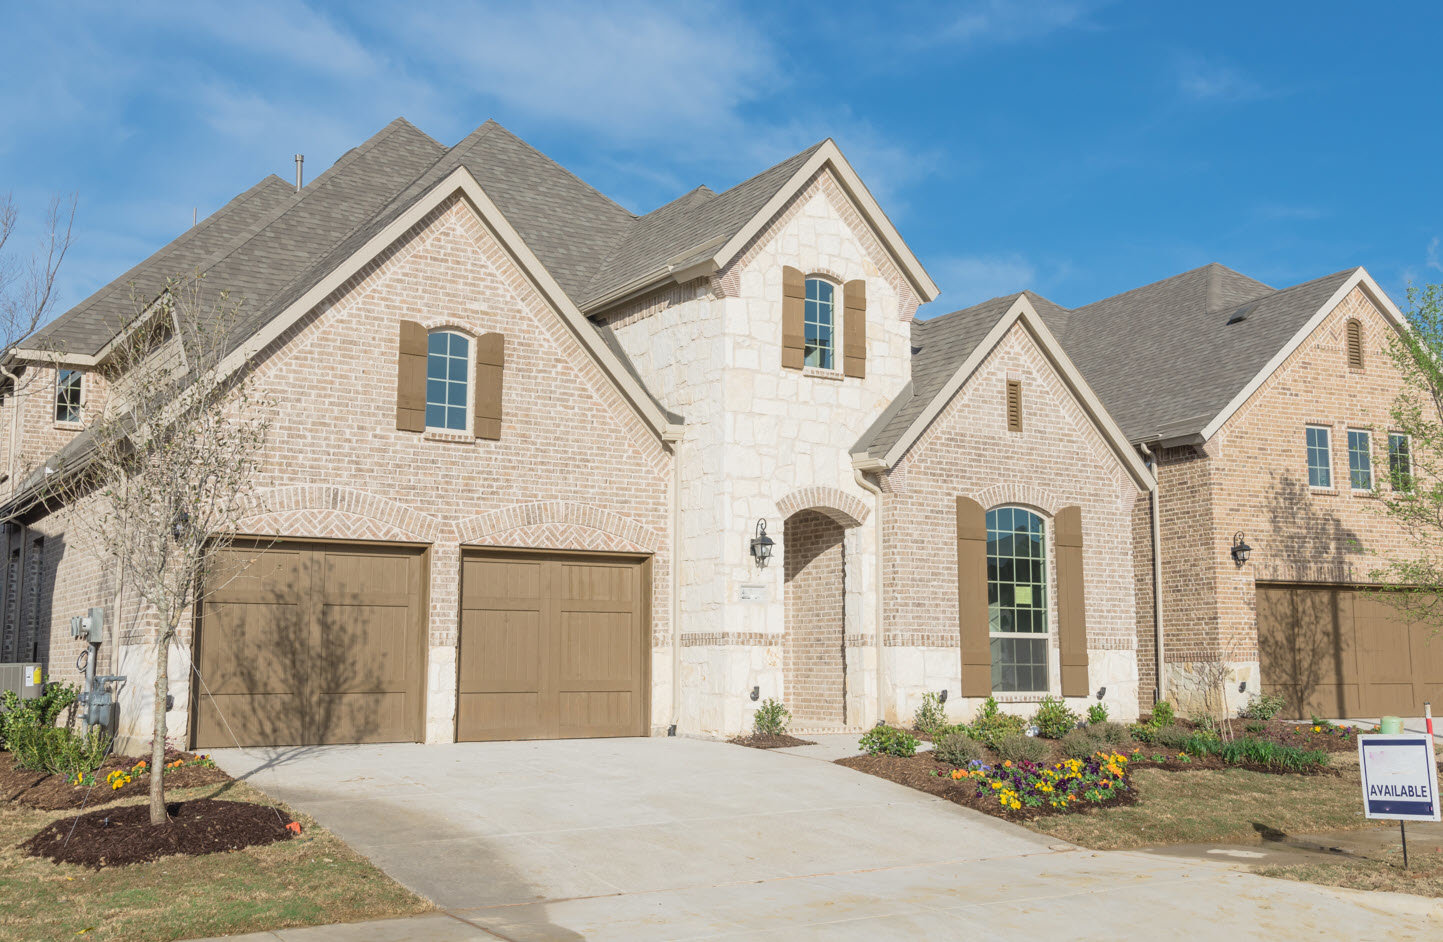 New Construction Builder Homes & Condos For Sale in Rockwall County, TX